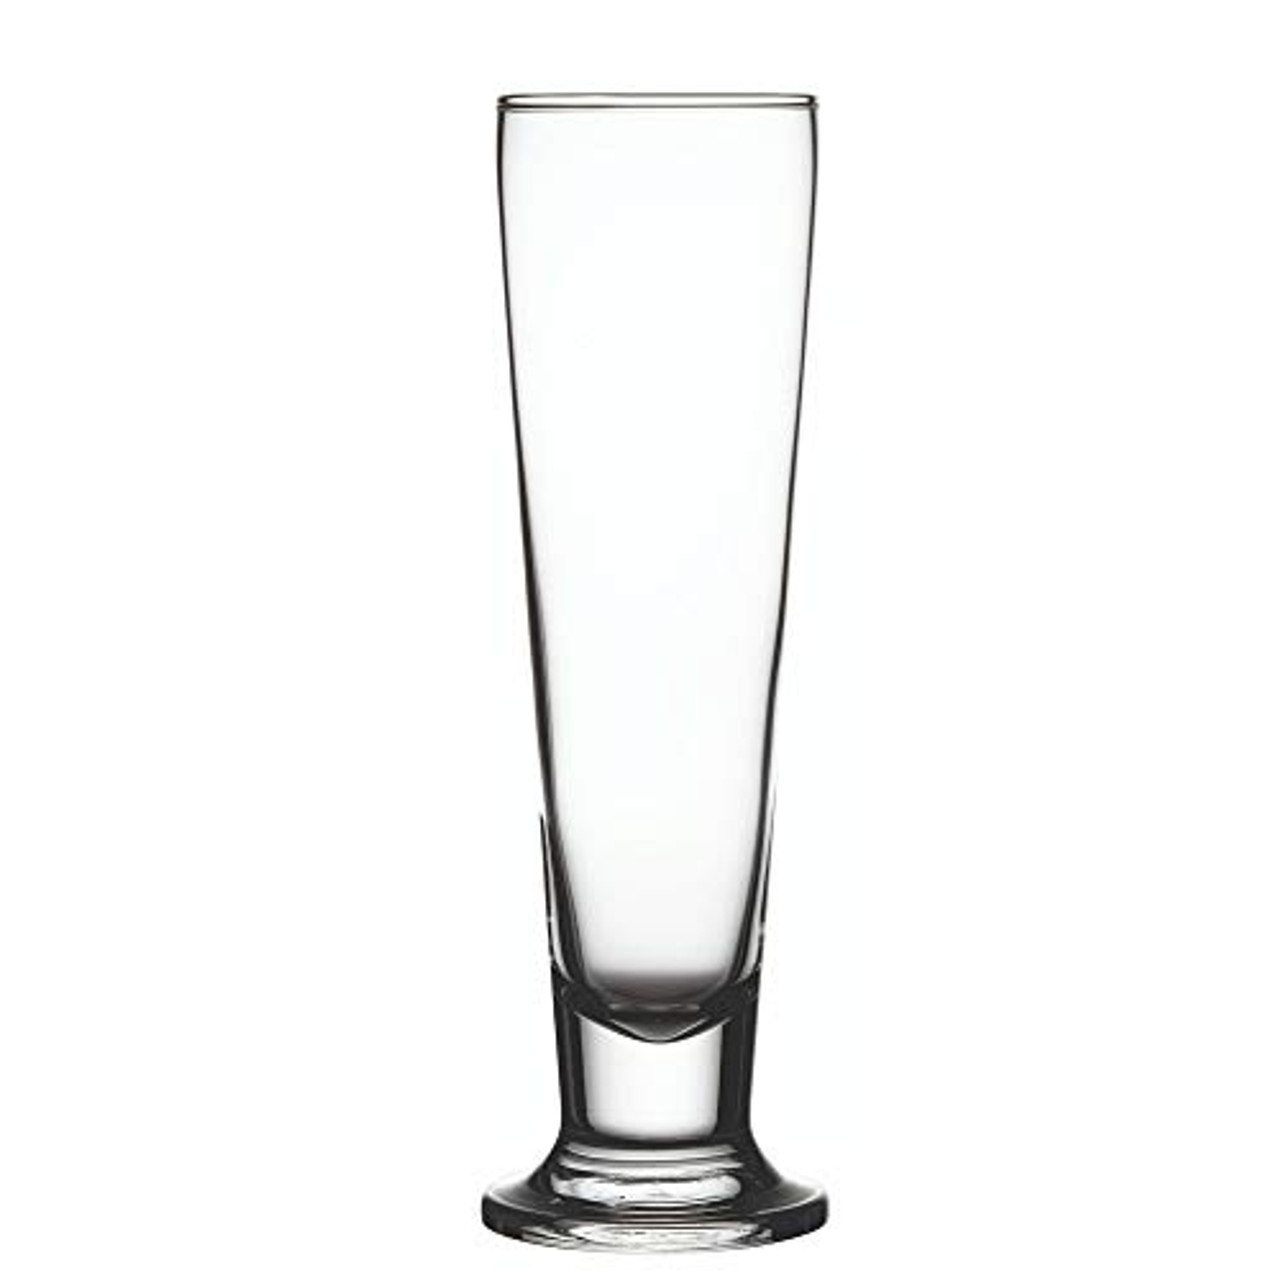 Tall Boy Pilsner Personalized Beer Glass – donebetter